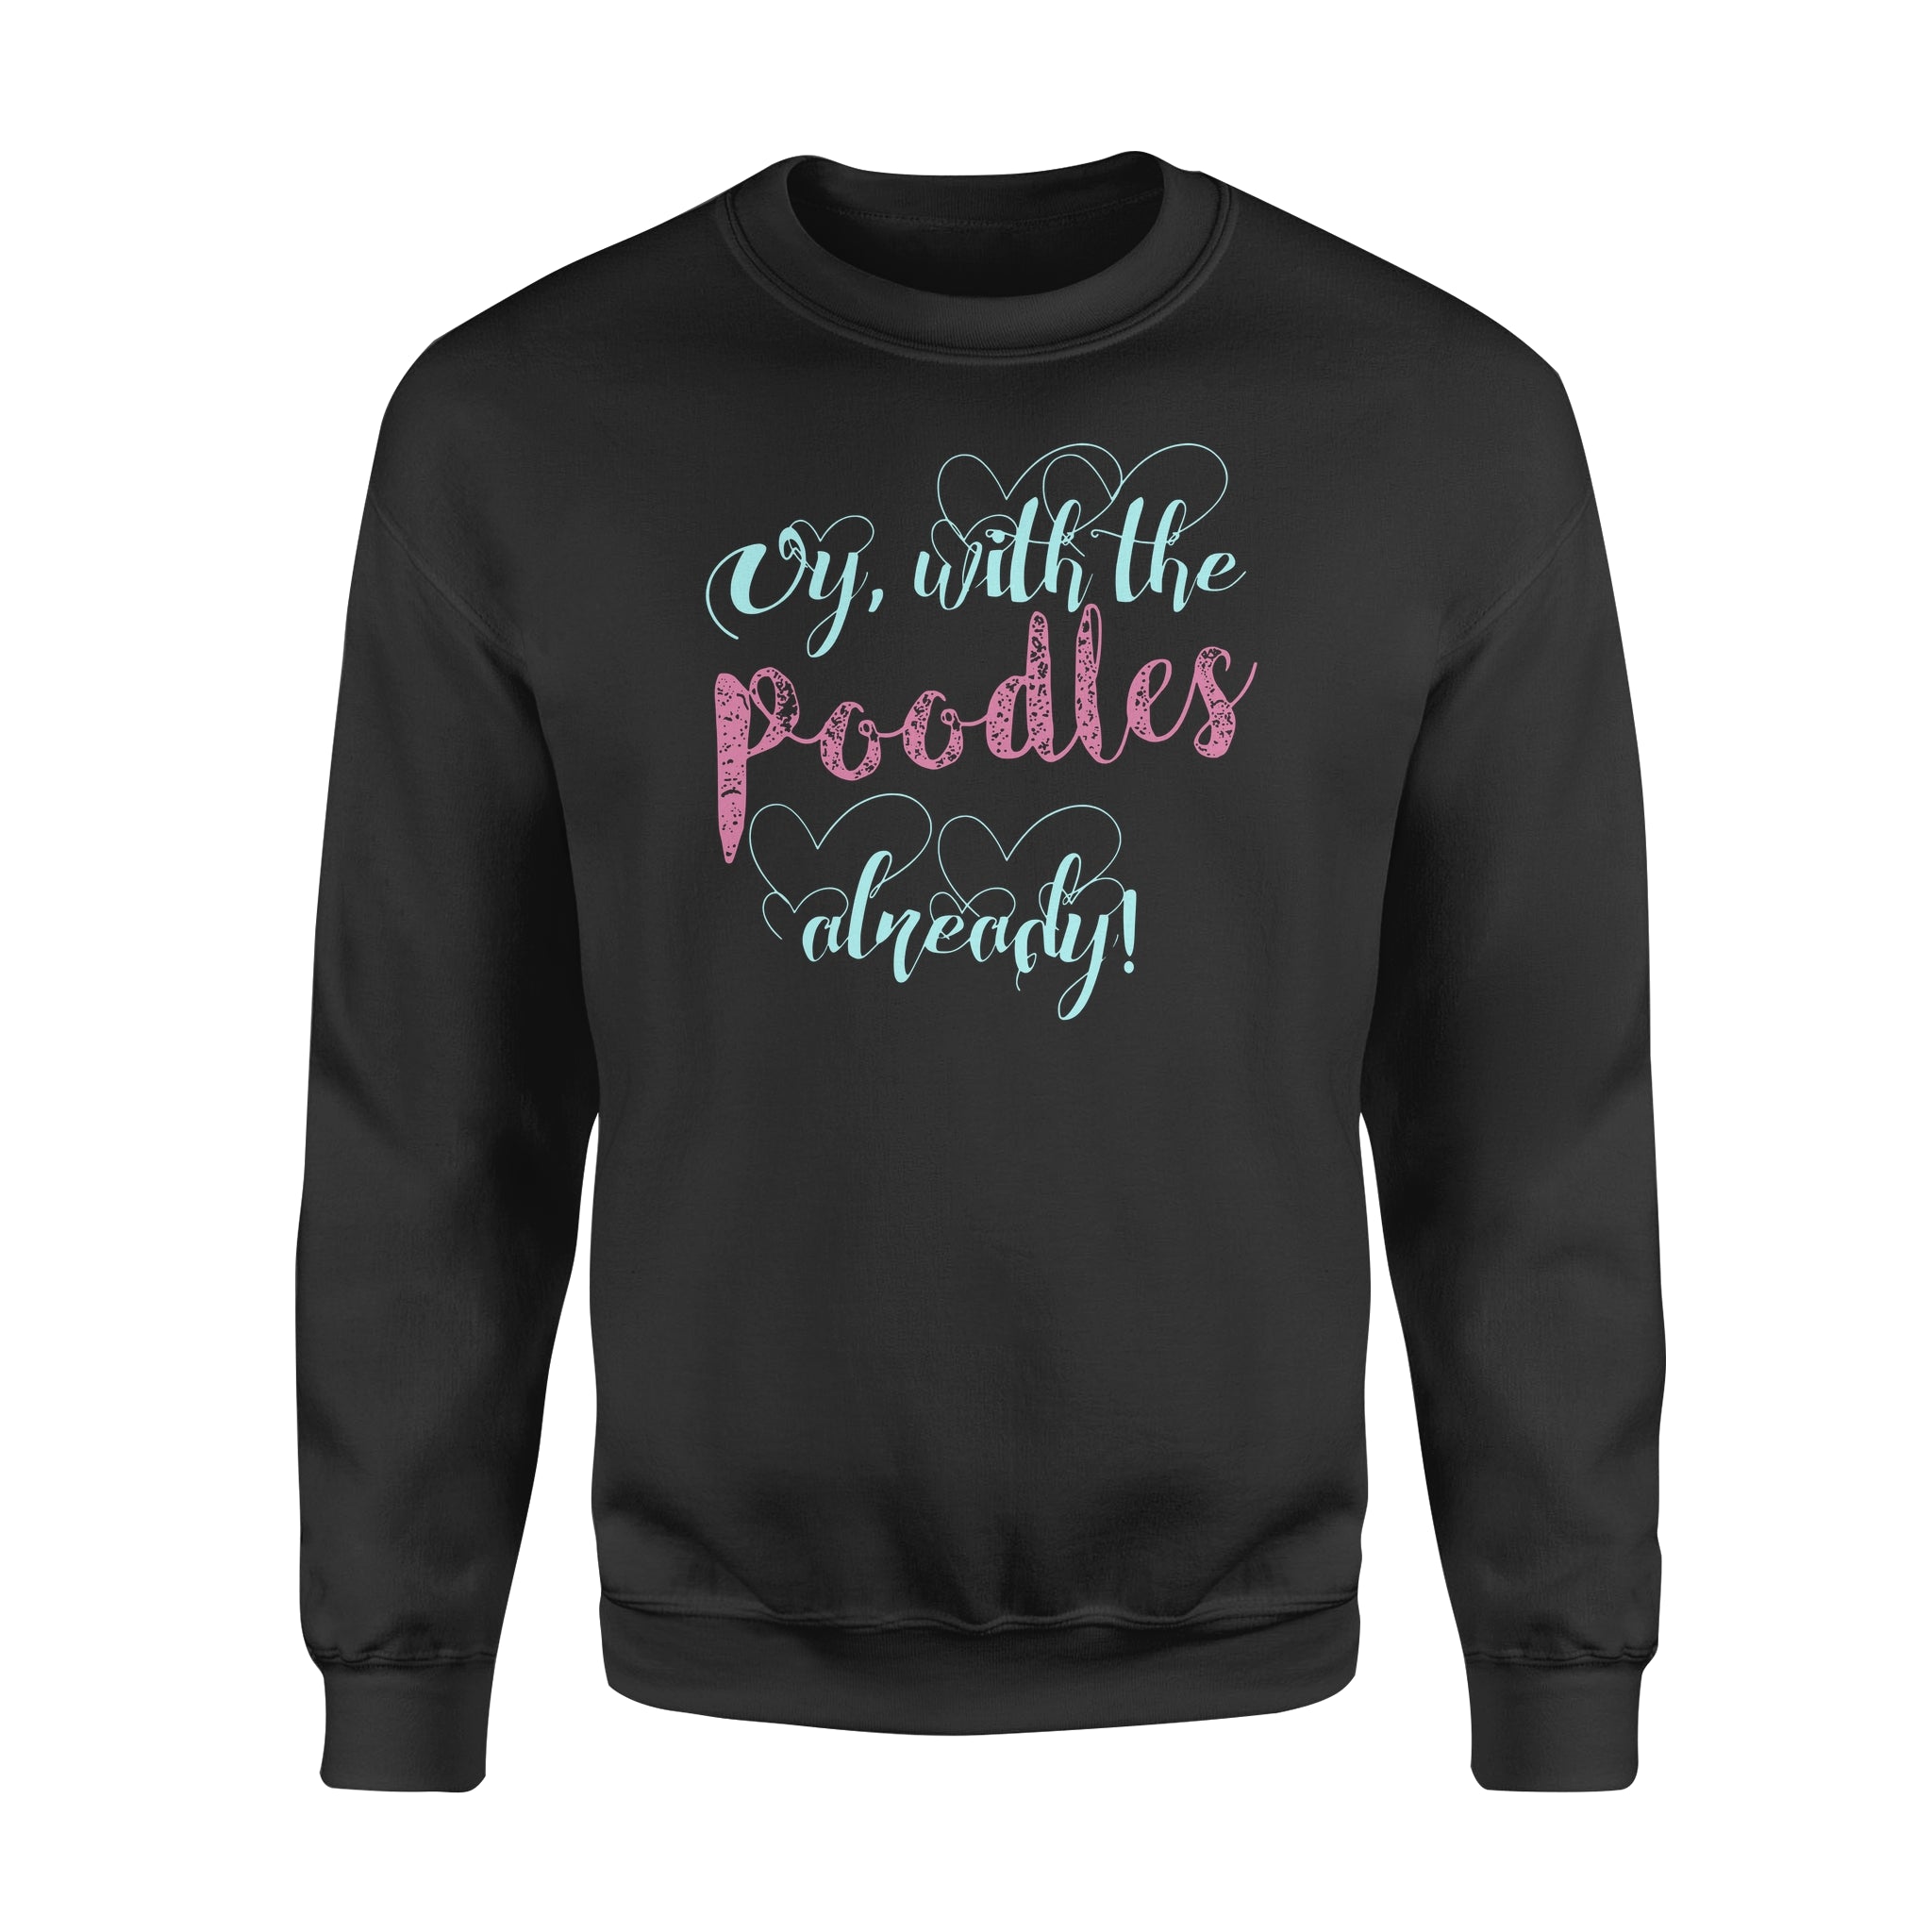 Oy With The Poodles Already - Standard Crew Neck Sweatshirt